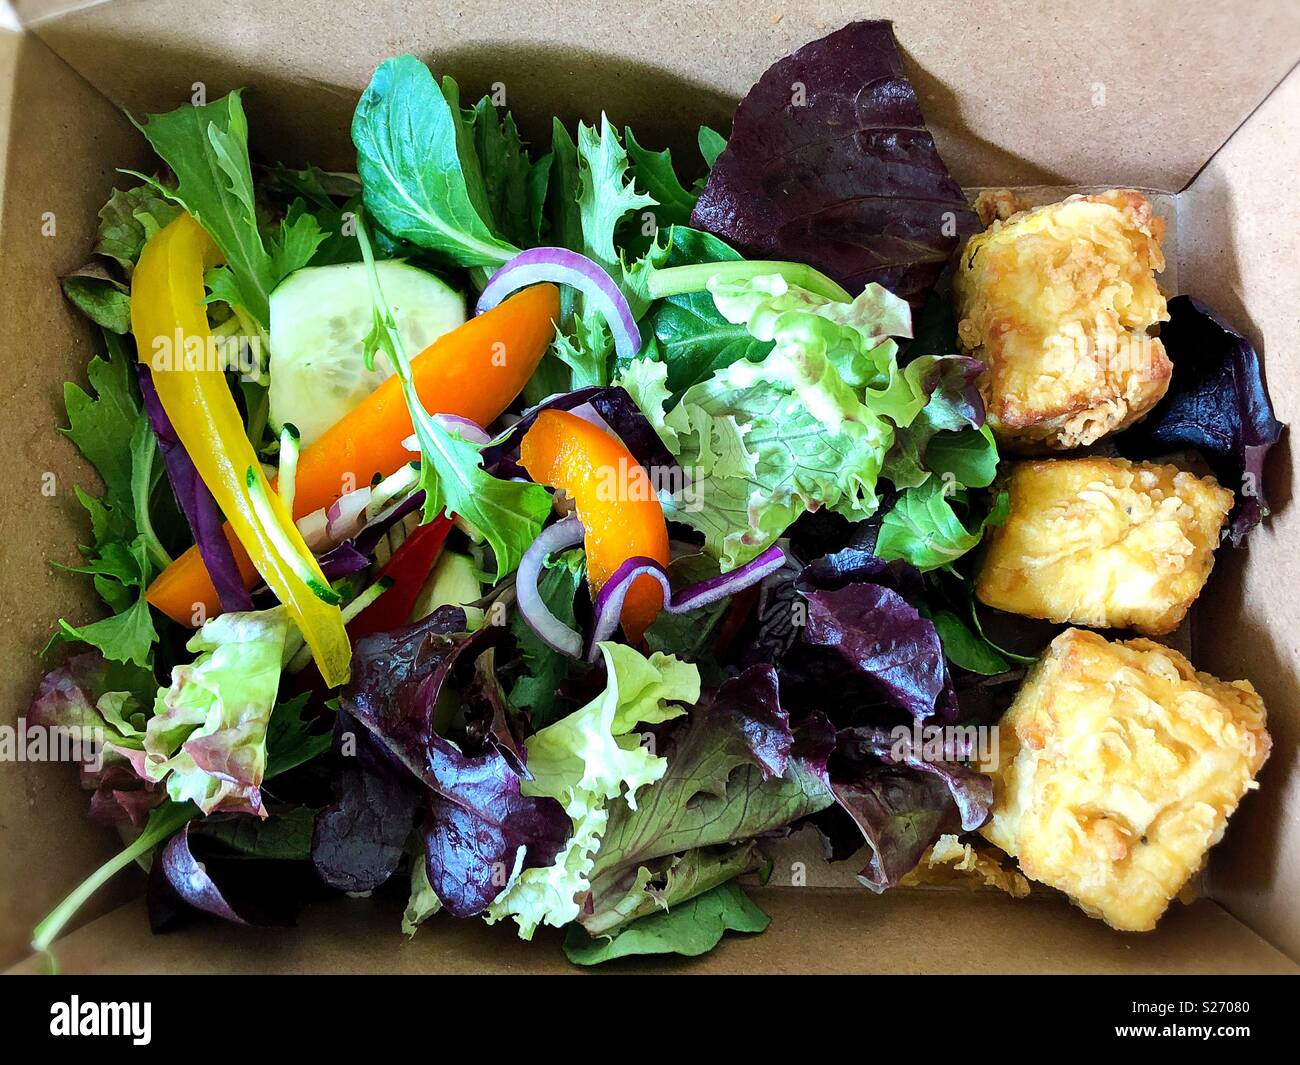 A nutritious lunch of salad and fried tofu, from above, in a carry out container. Stock Photo